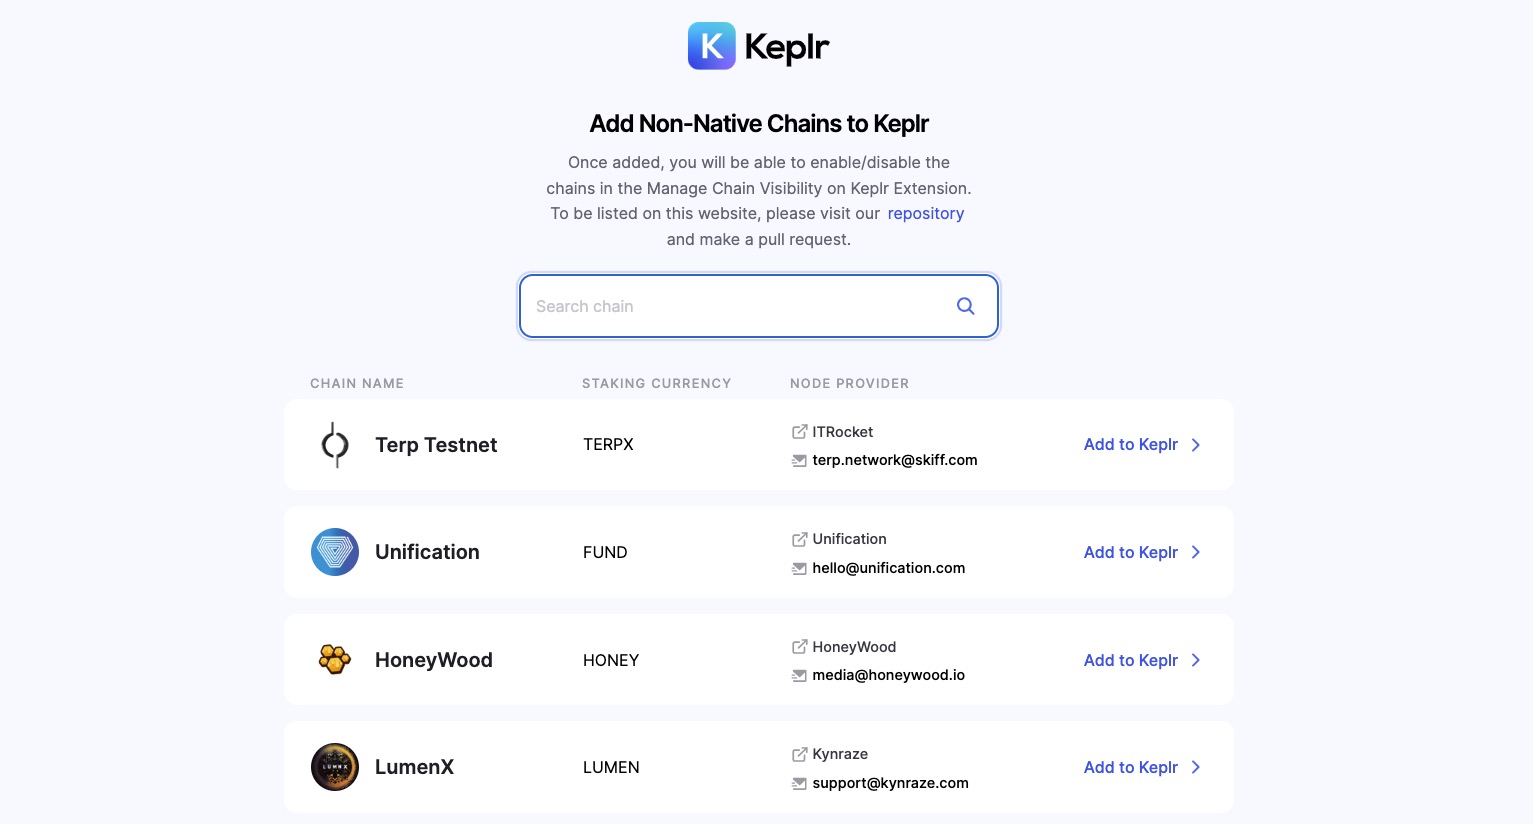 Image Website Add Non-Native Chains to Keplr